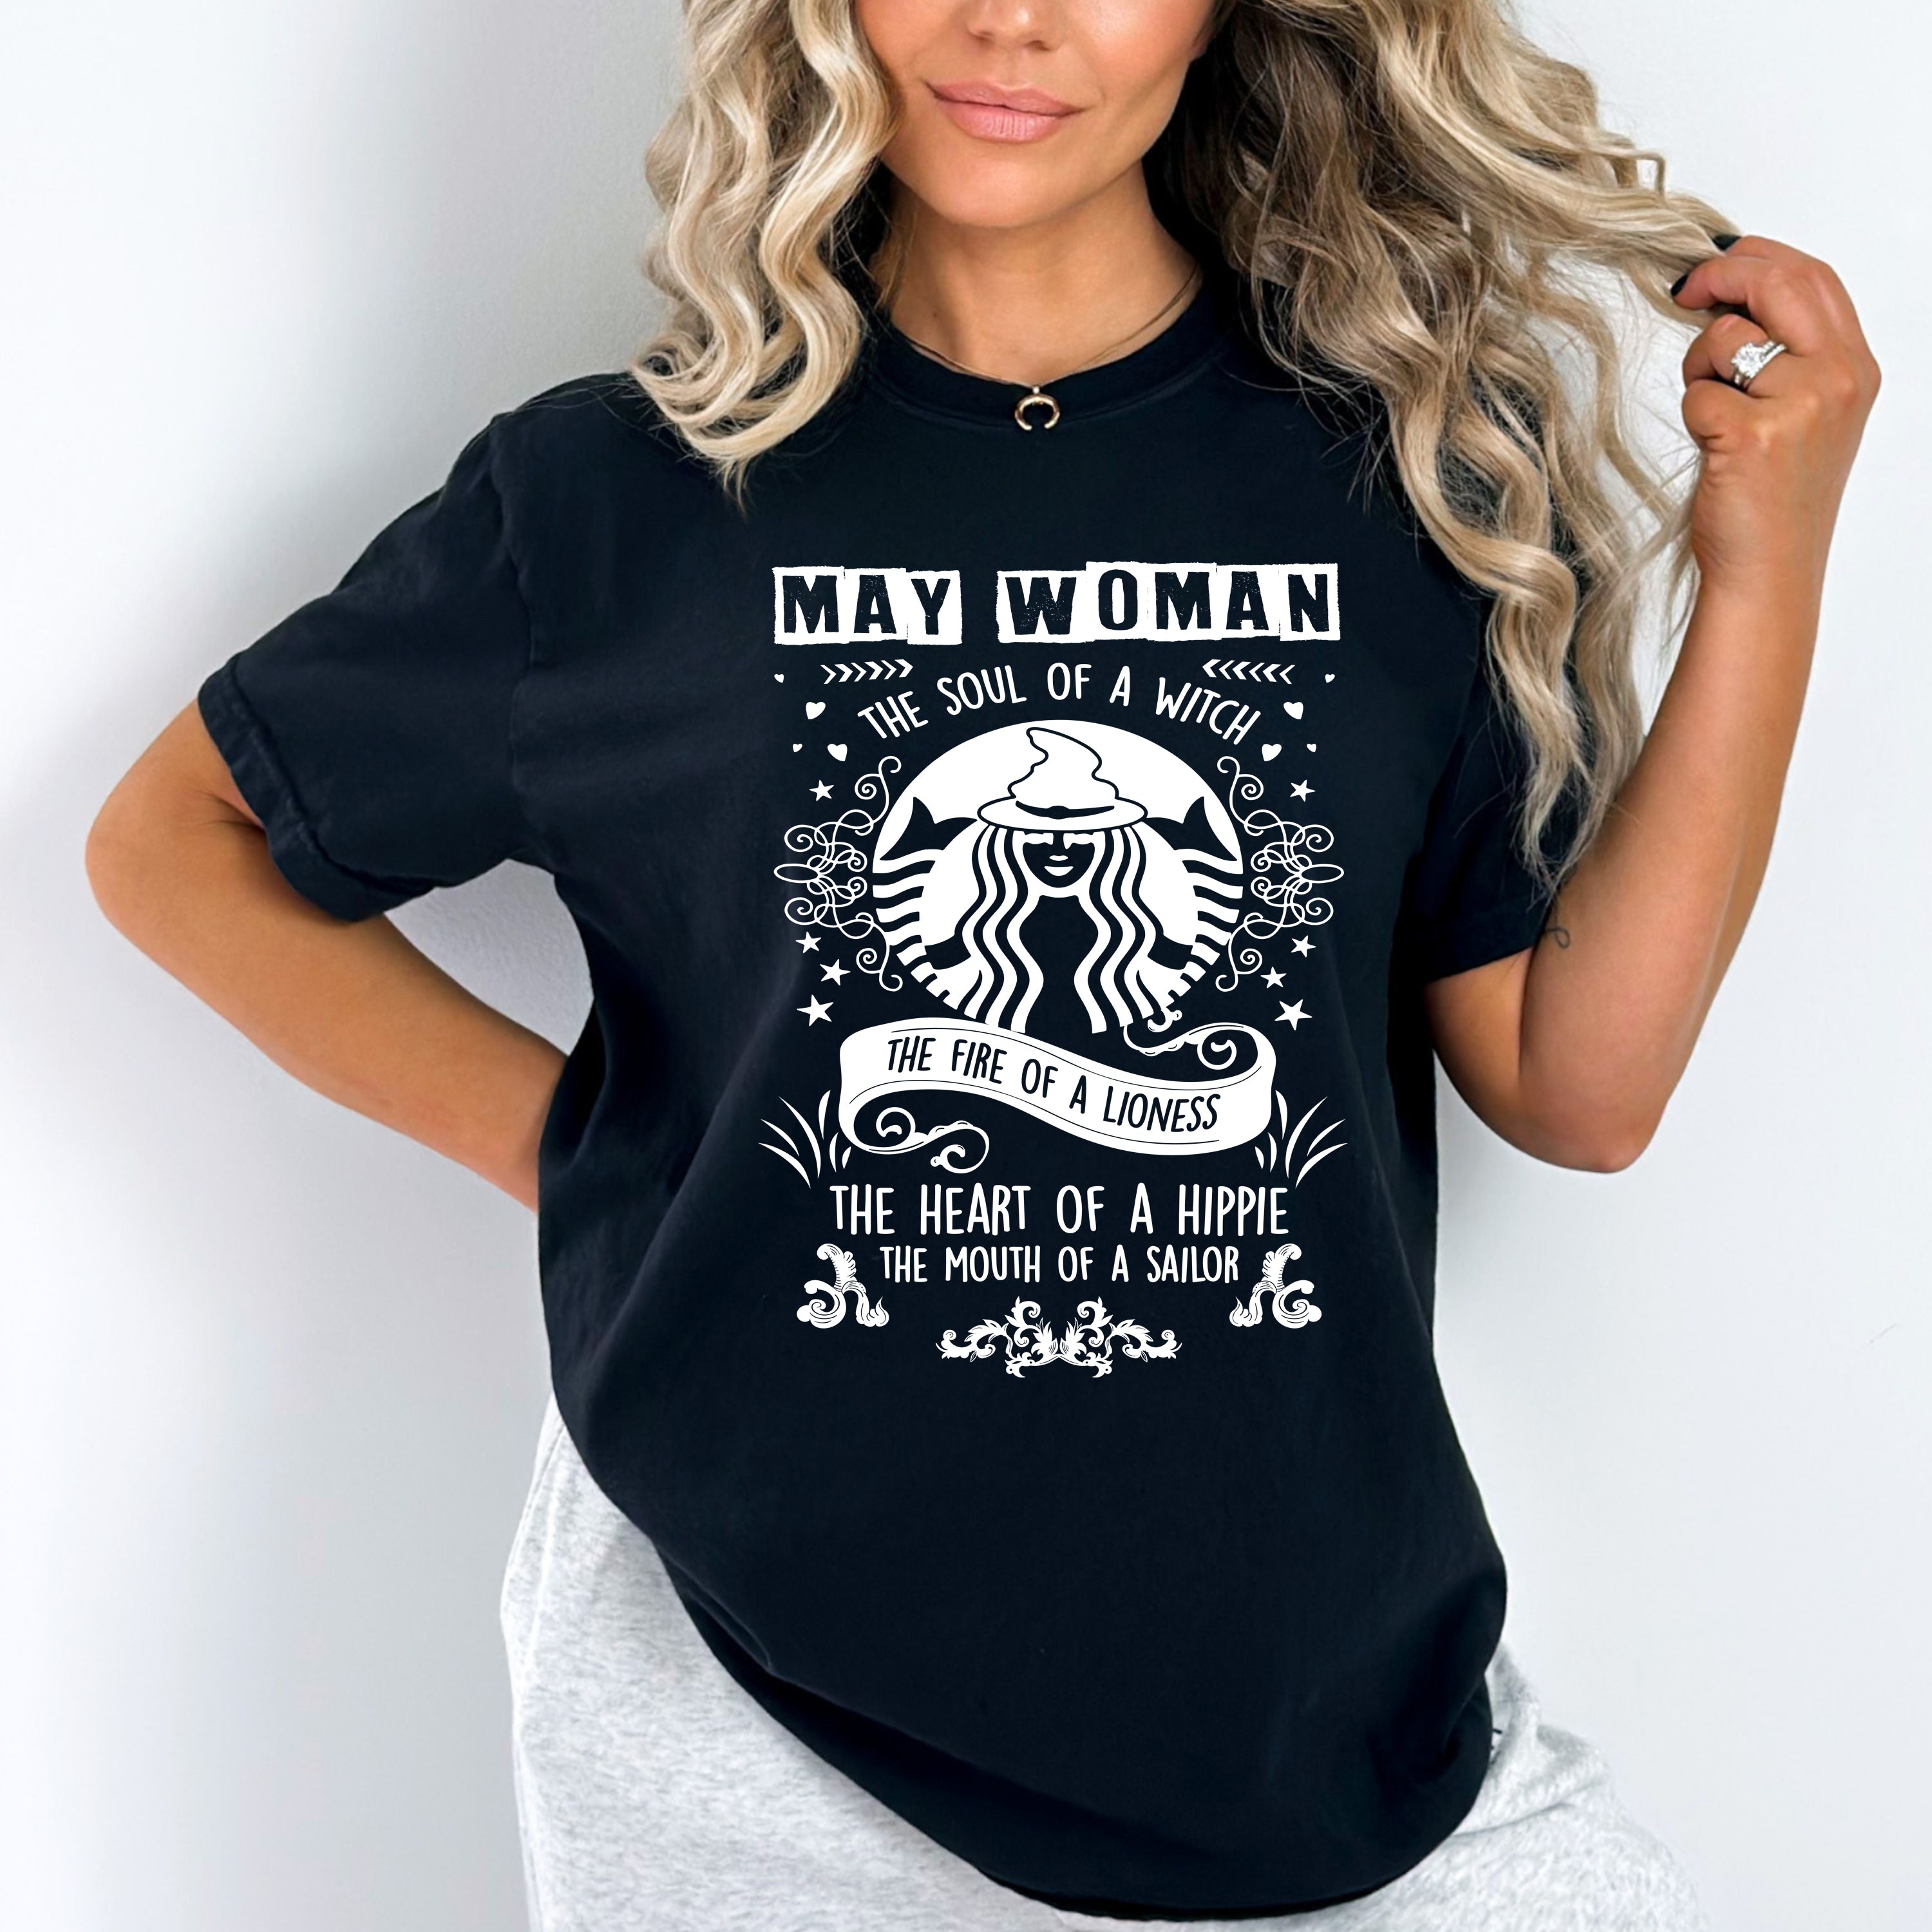 "MAY WOMAN The Soul Of A Witch The Fire Of A Lioness The Heart Of A Hippie...",T-Shirt.